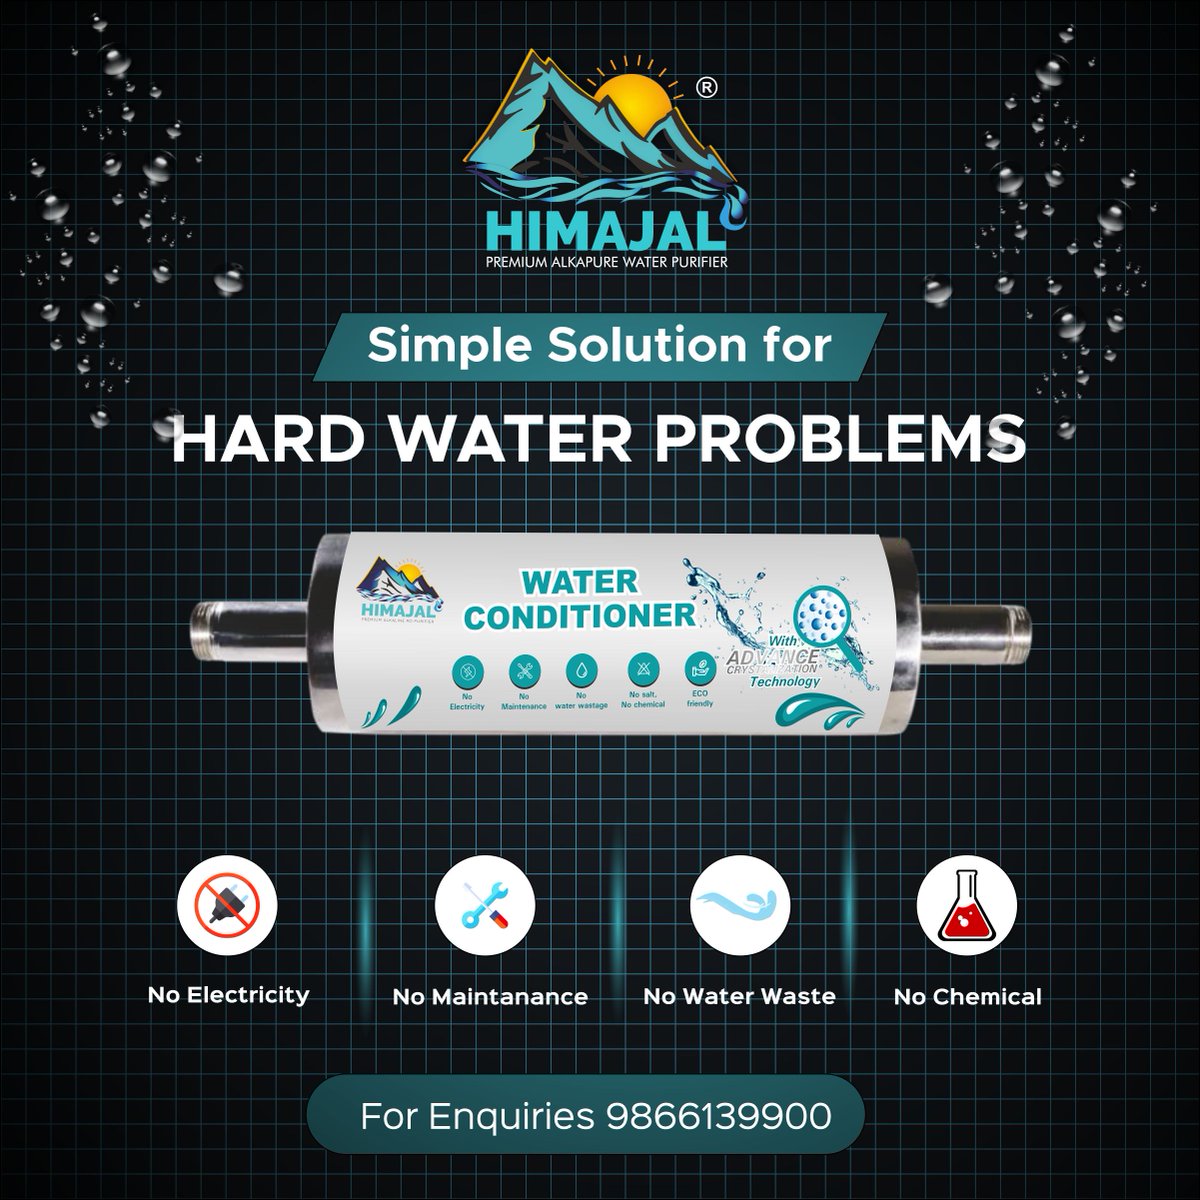 Himajal Brought you the best solution for Hard Water problems.

Avoid Scale buildup in your piping and appliances..

For Enquiry 9866139900

#waterconditioner  #himajalwaterconditioner #hardwater #hardwaterproblems #apartmentwater #factorywater #softwater #removescale